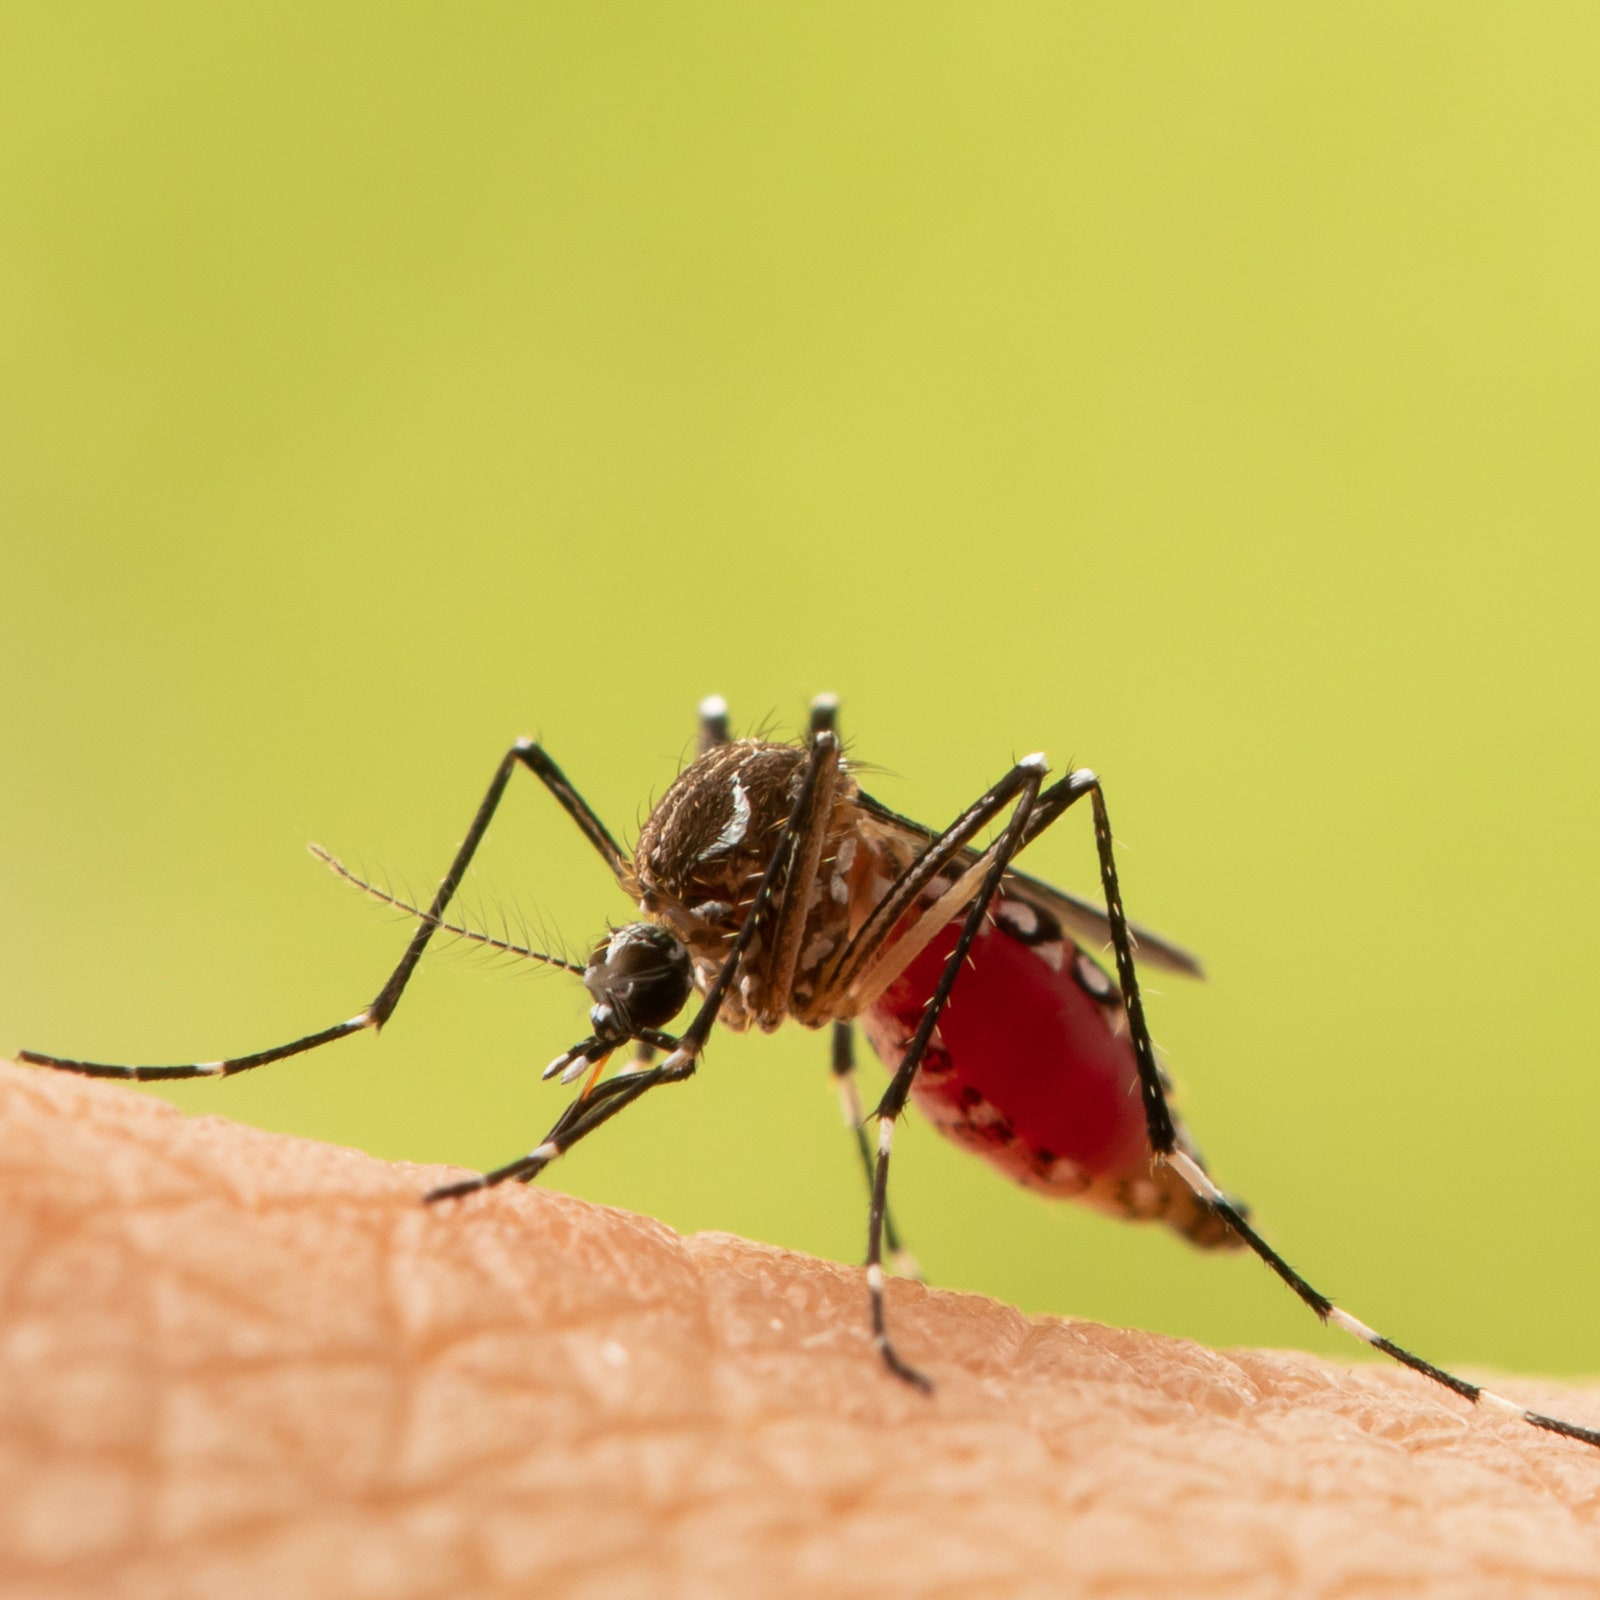 5 Ways to Get Mosquito Bite Relief Quickly